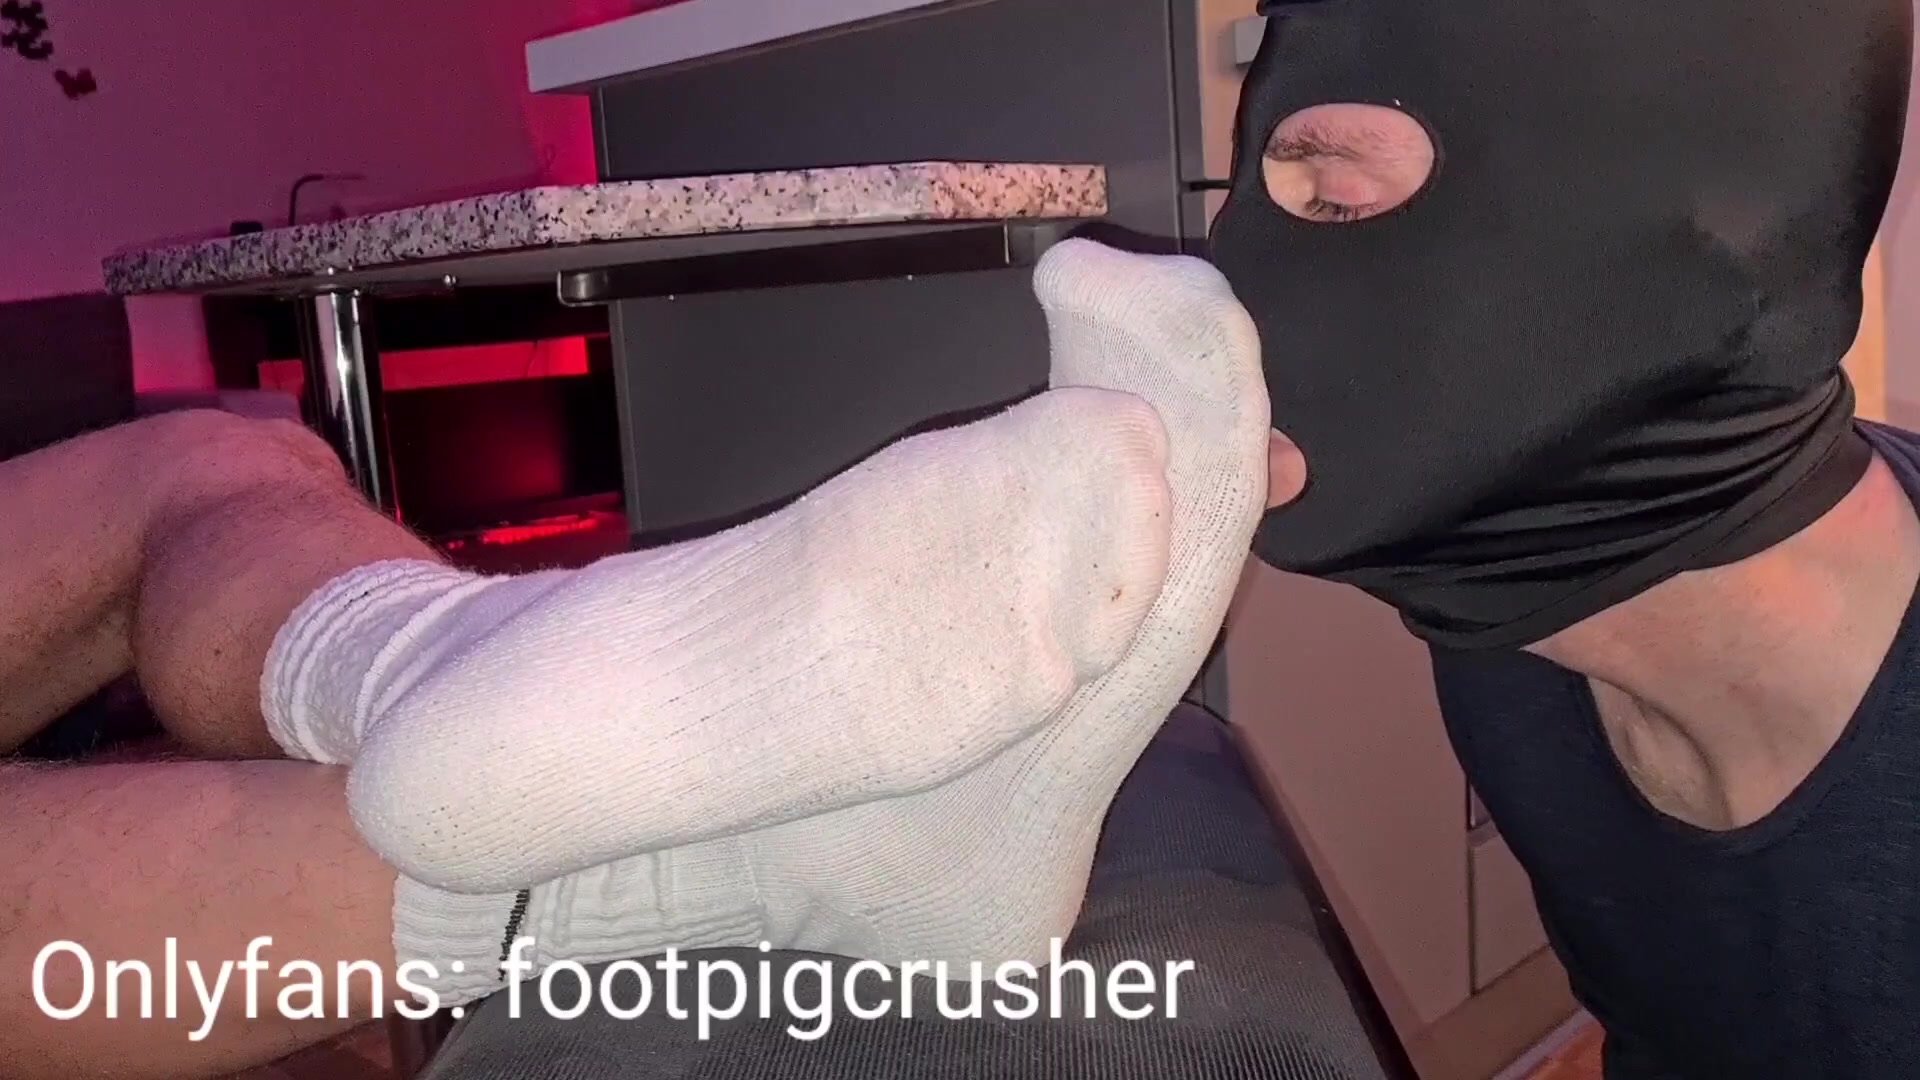 His first foot worship session ever